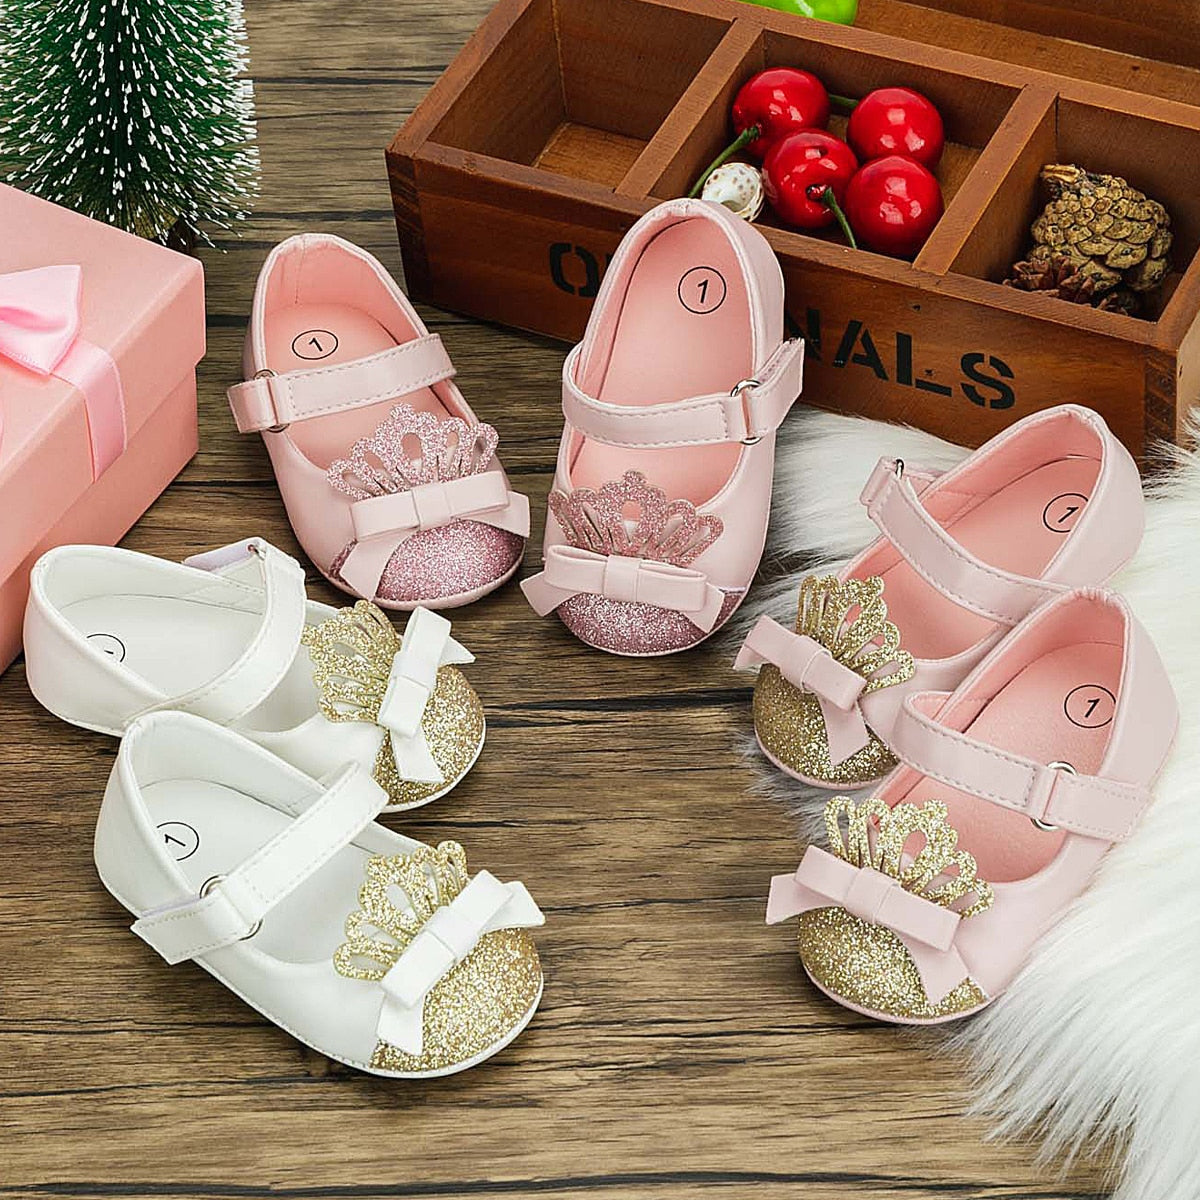 Baby Shoes - Princess Baby Girls First Walkers 0-18M